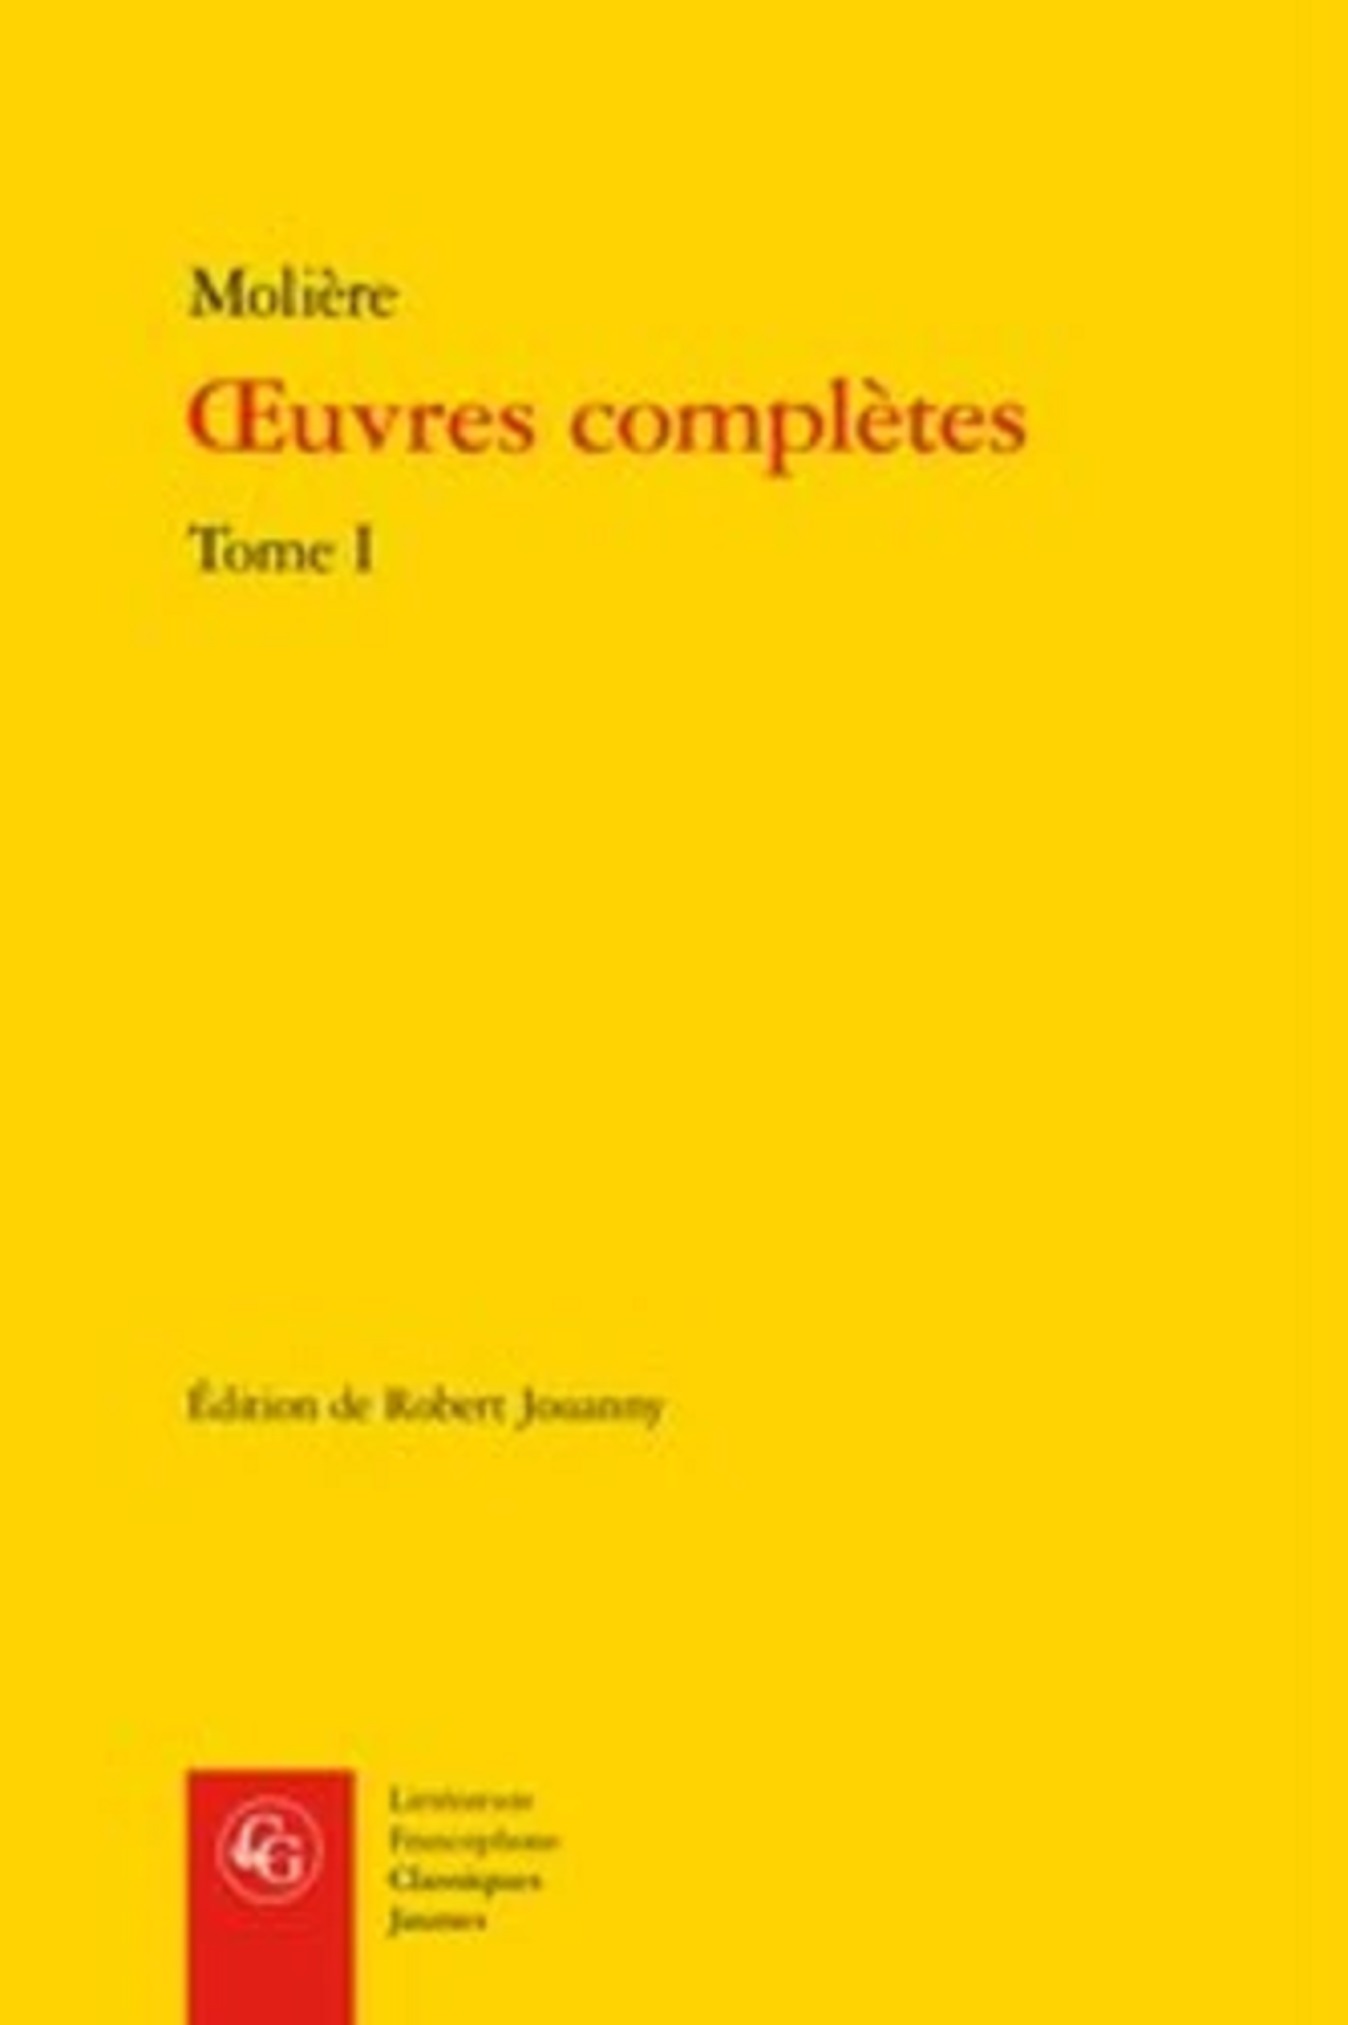 Oeuvres completes - Tome 1